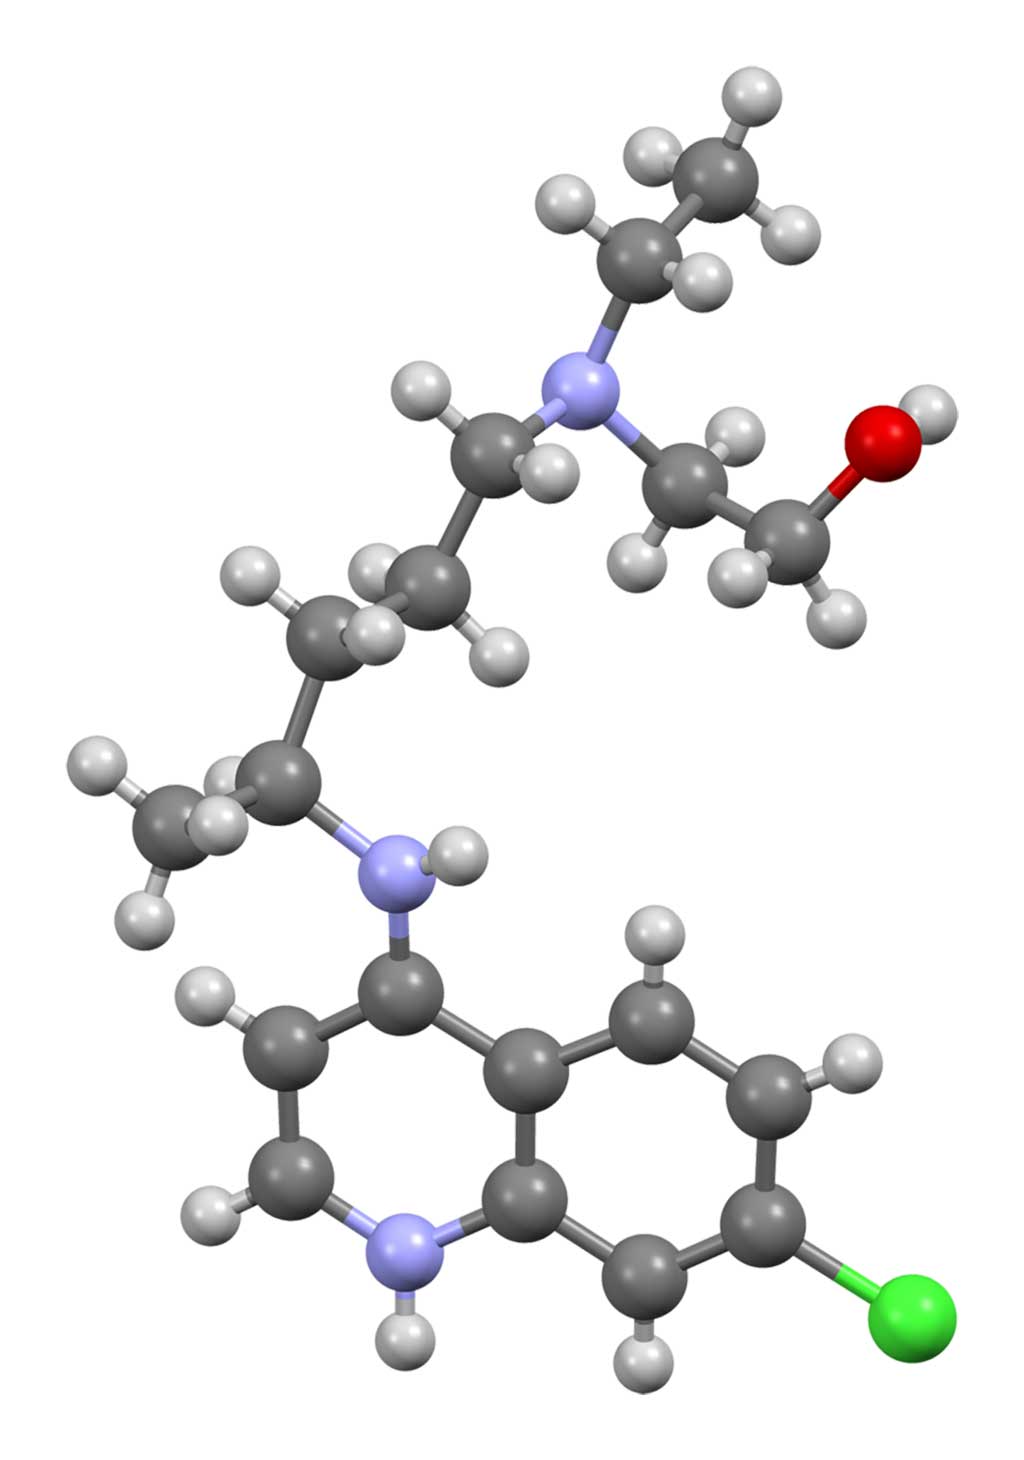 Image: Ball-and-stick model of a hydroxychloroquine molecule (Photo courtesy of Wikimedia Commons)